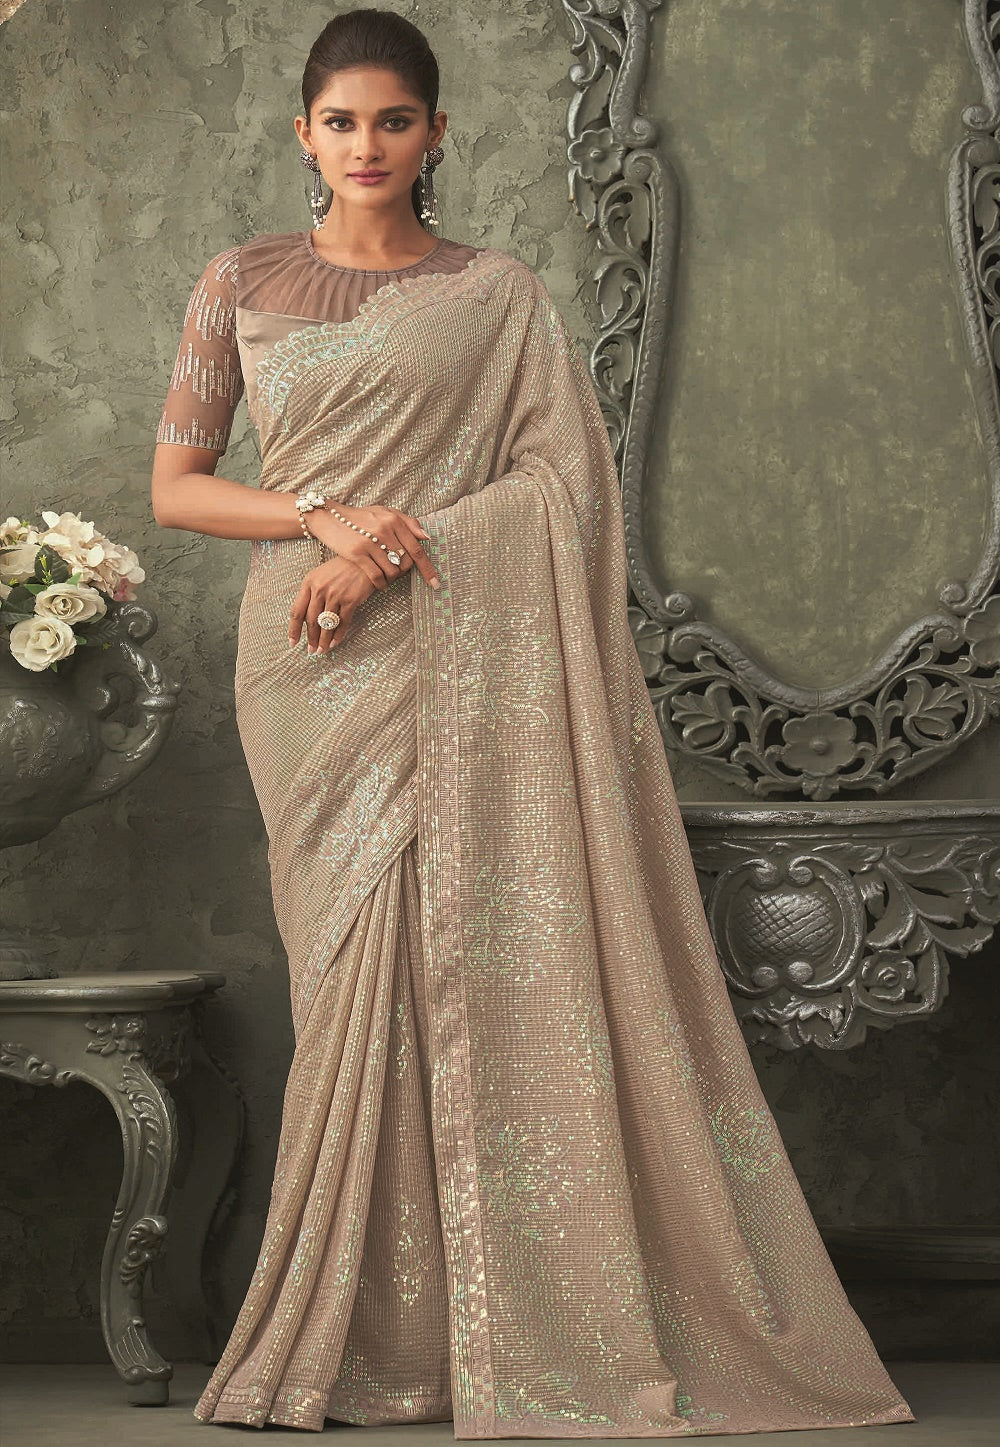 Georgette Sequined Saree in Light Fawn